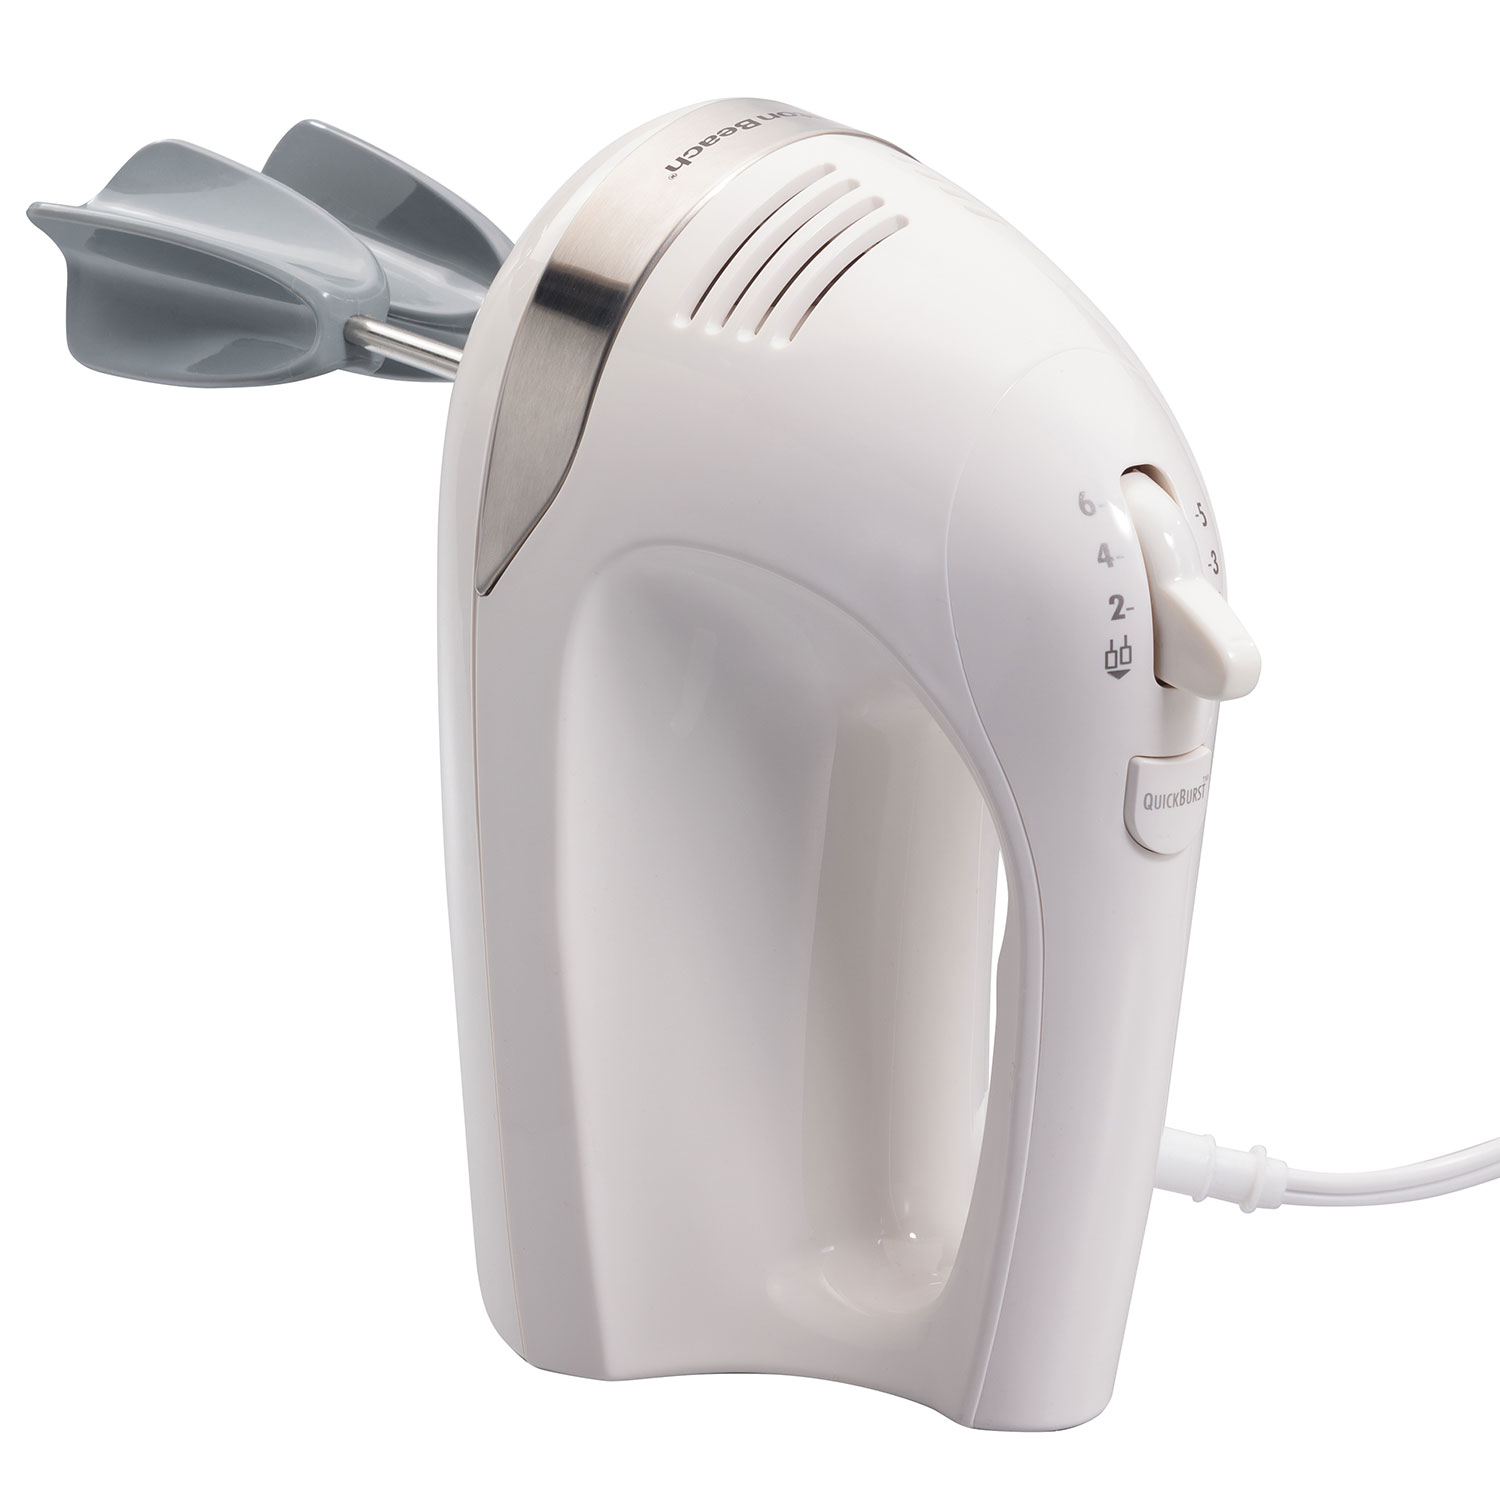 6 Speed Hand Mixer with Easy Clean Beaters, White (62636)